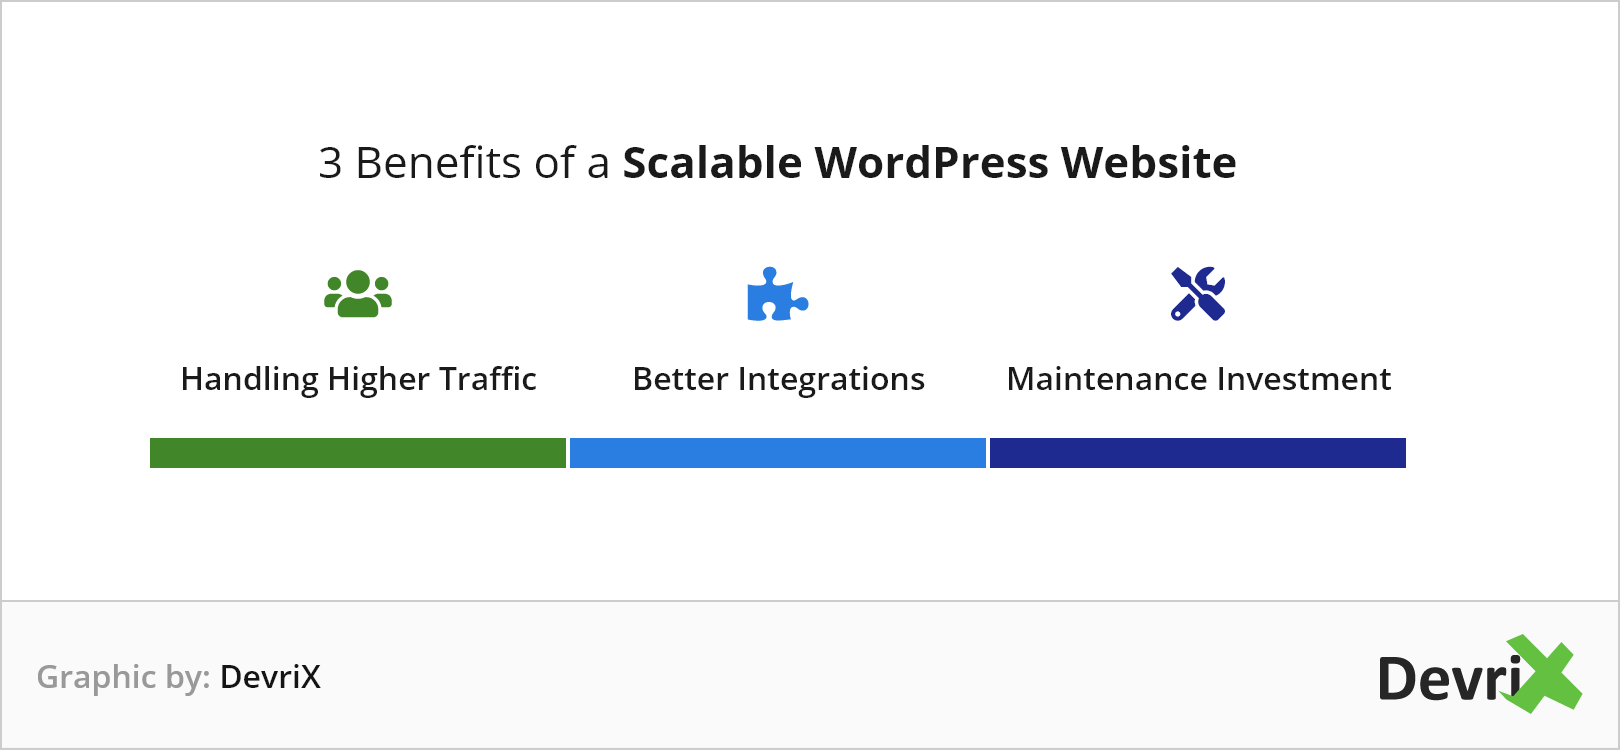 Graphic by DevriX for the three benefits of a scalable WordPress website.